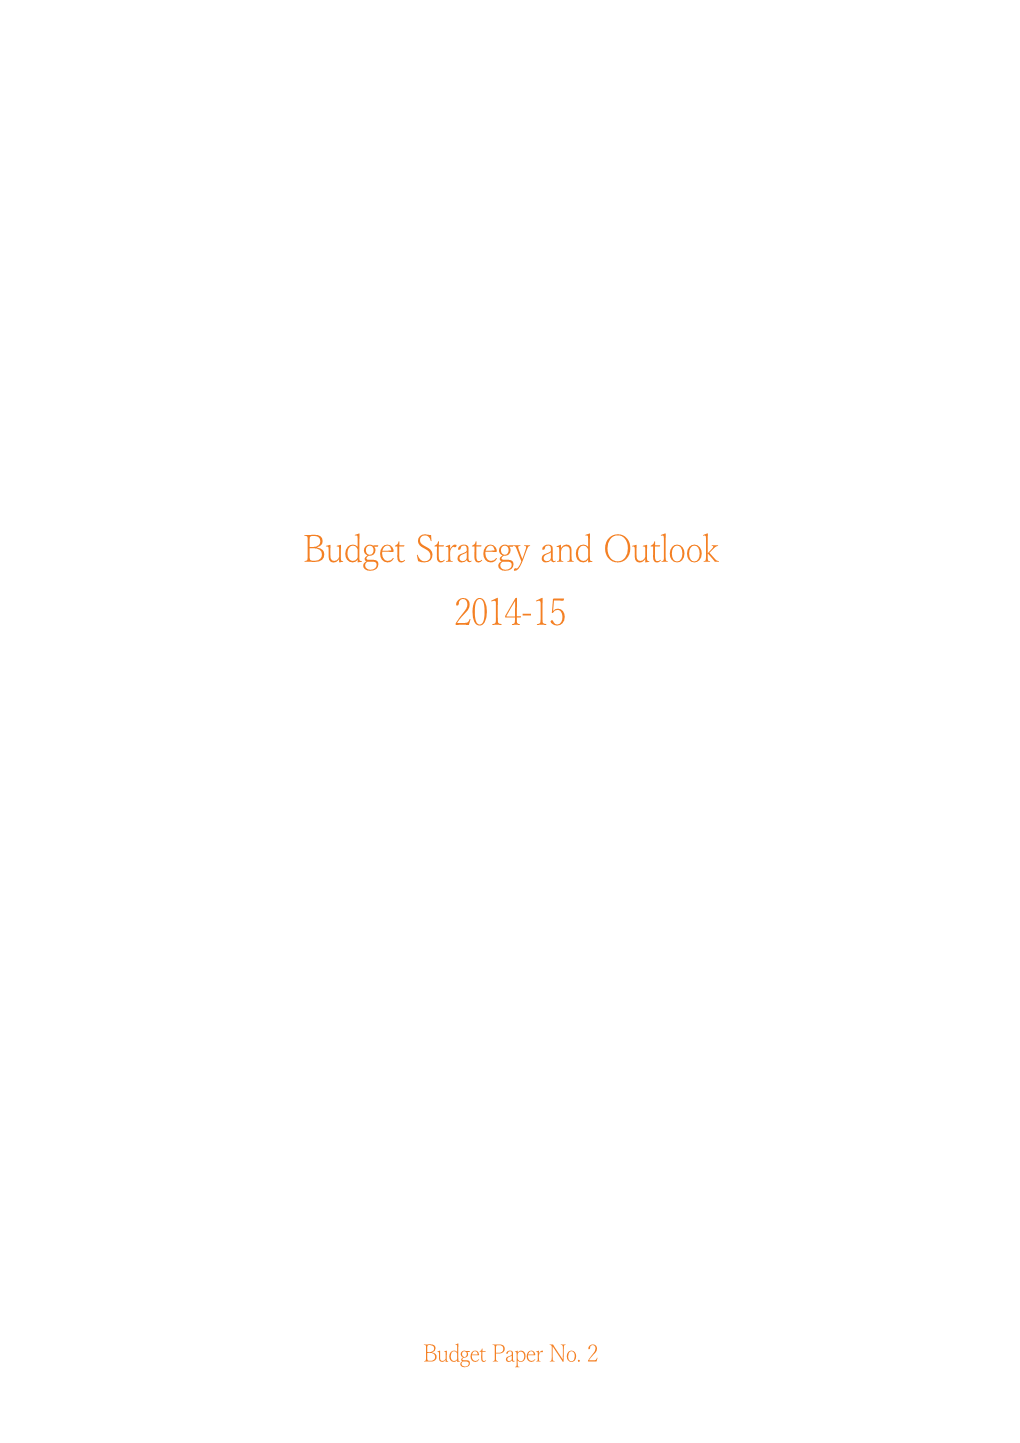 Budget Strategy and Outlook: 2014-15